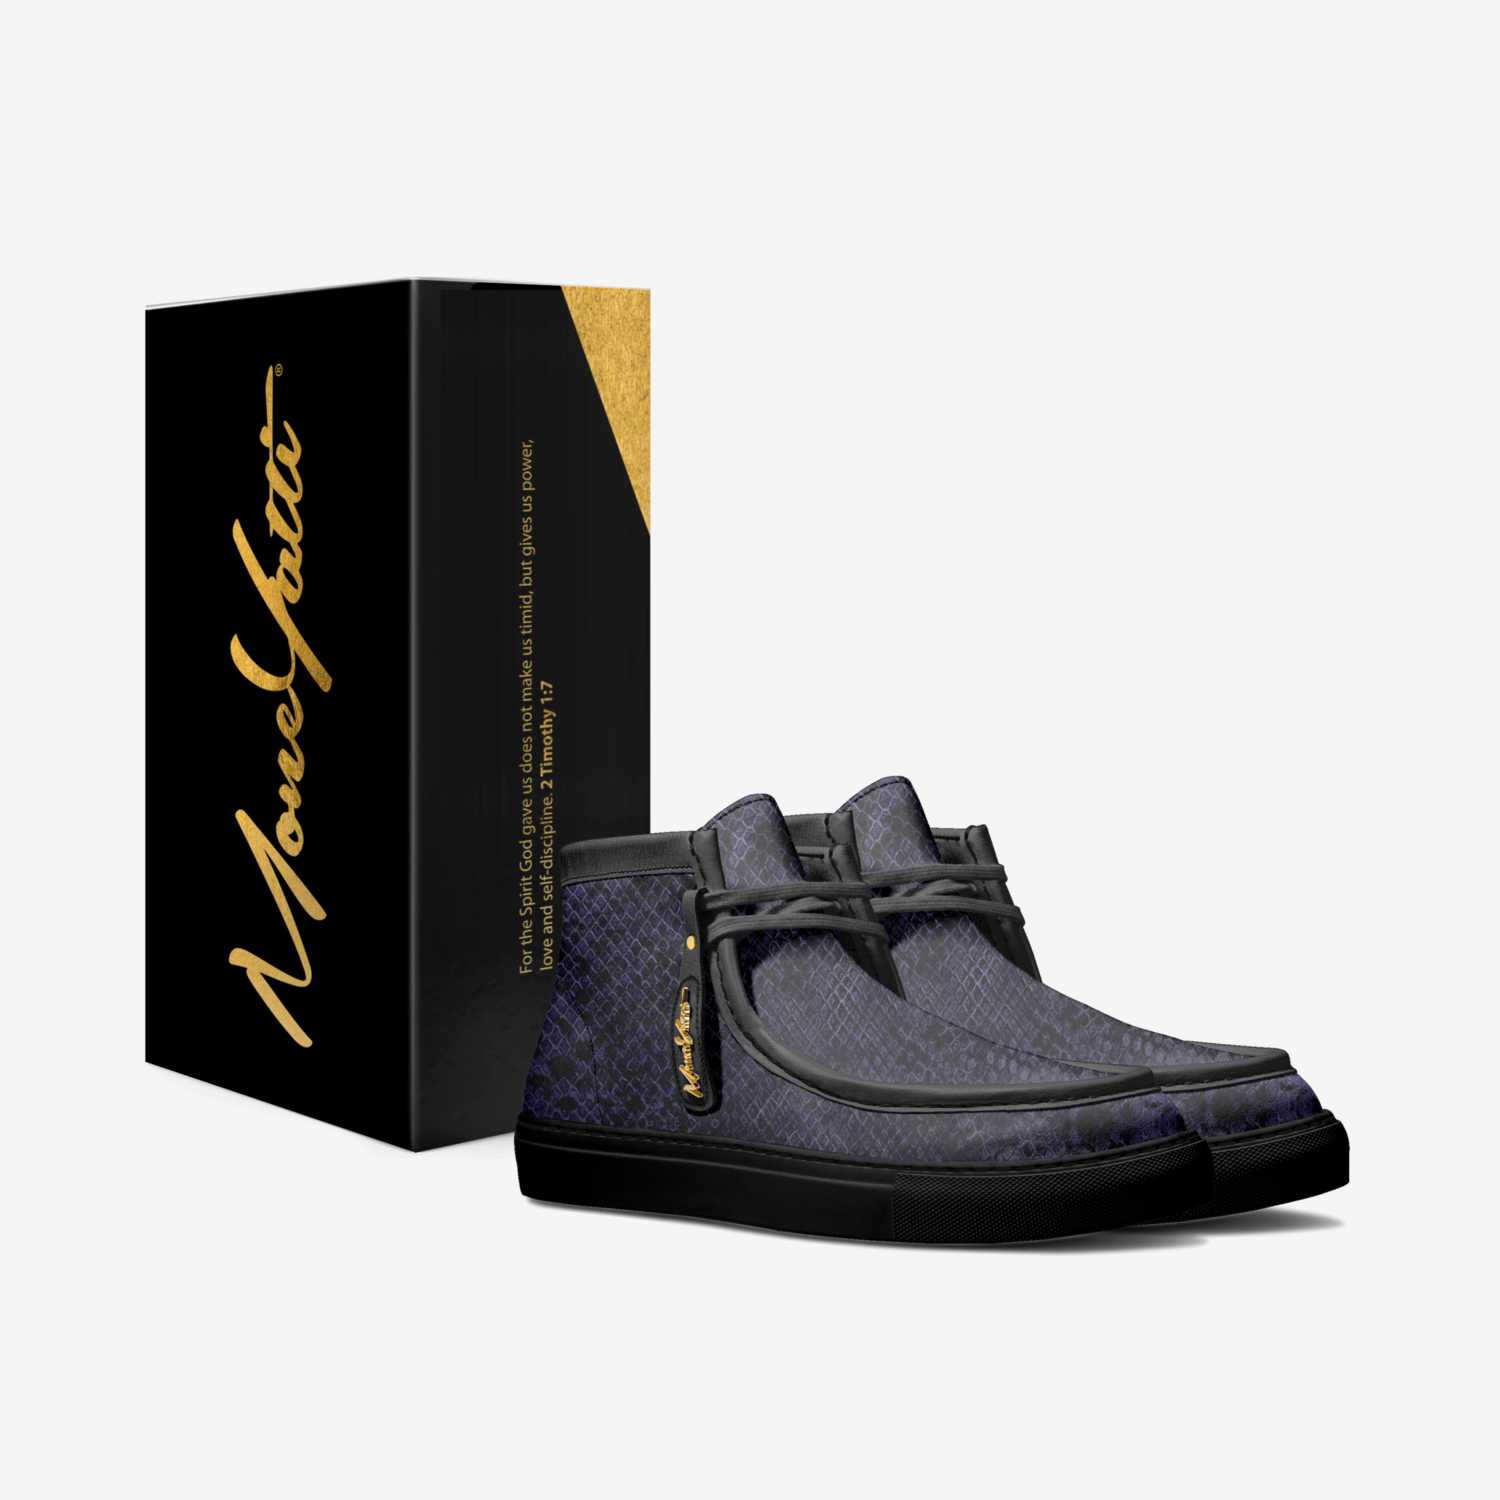 LUX 016 custom made in Italy shoes by Moneyatti Brand | Box view